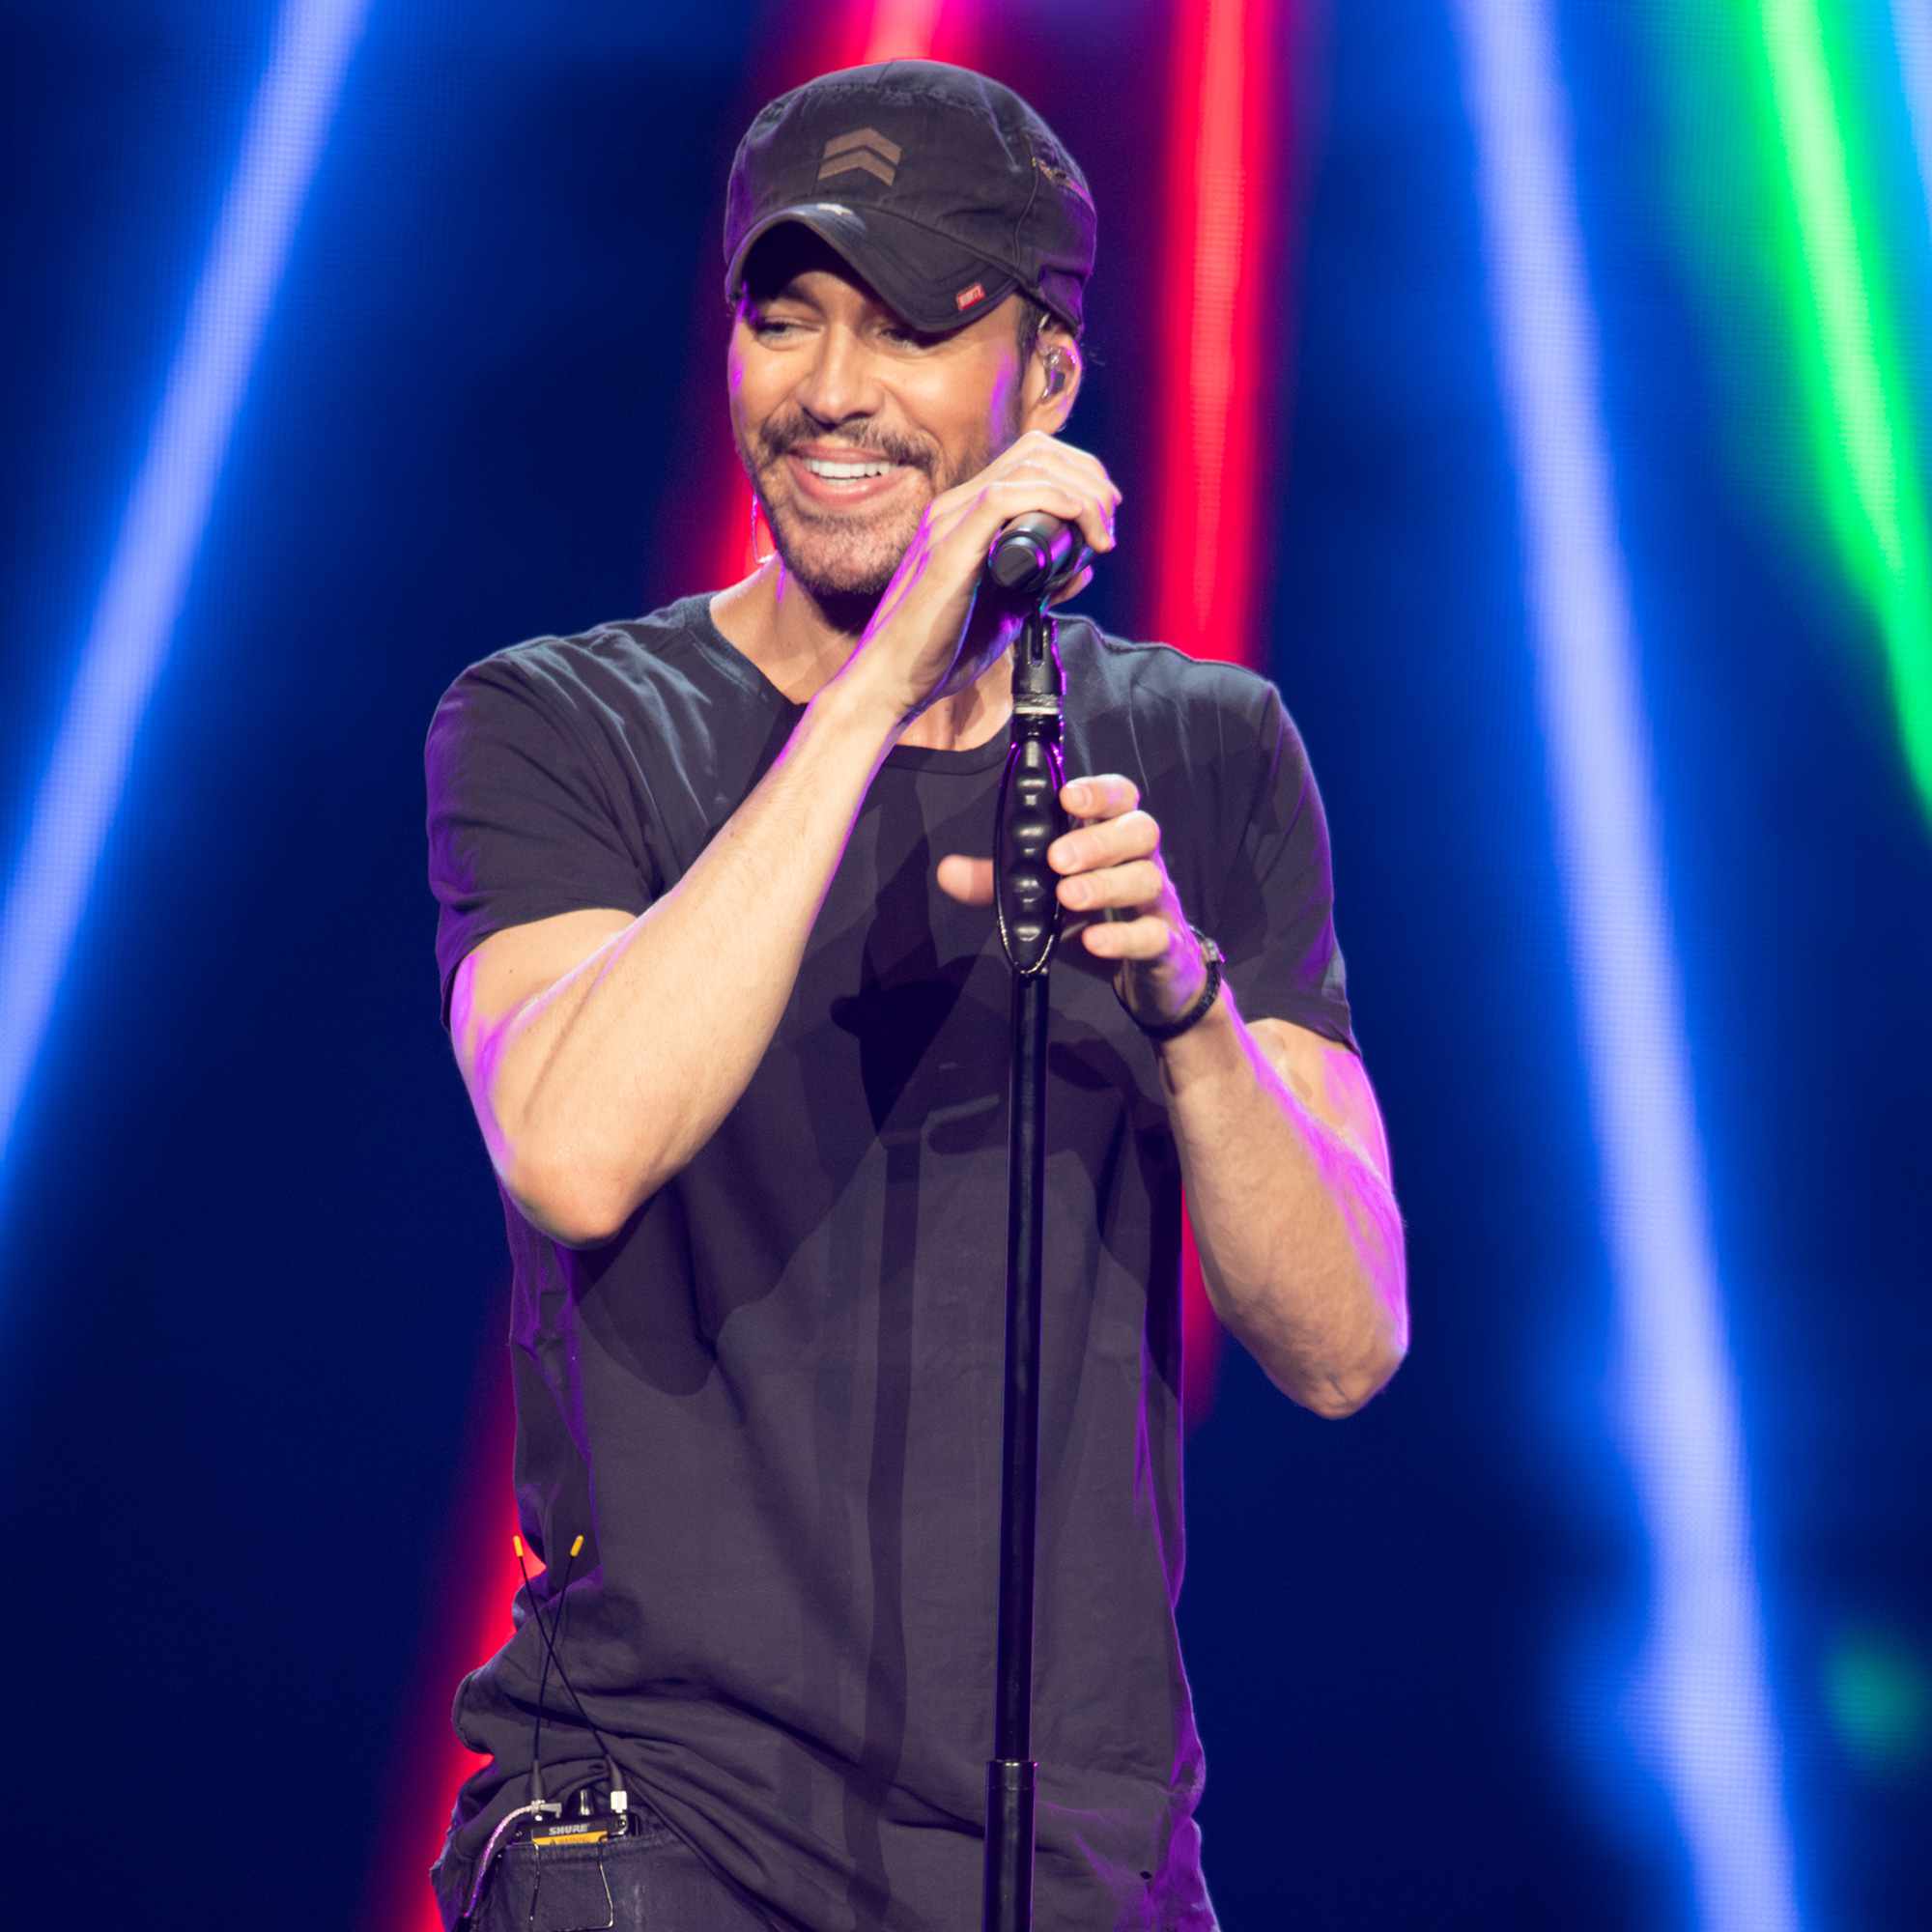 Enrique Iglesias performs during the Trilogy Tour at the Dickies Arena 